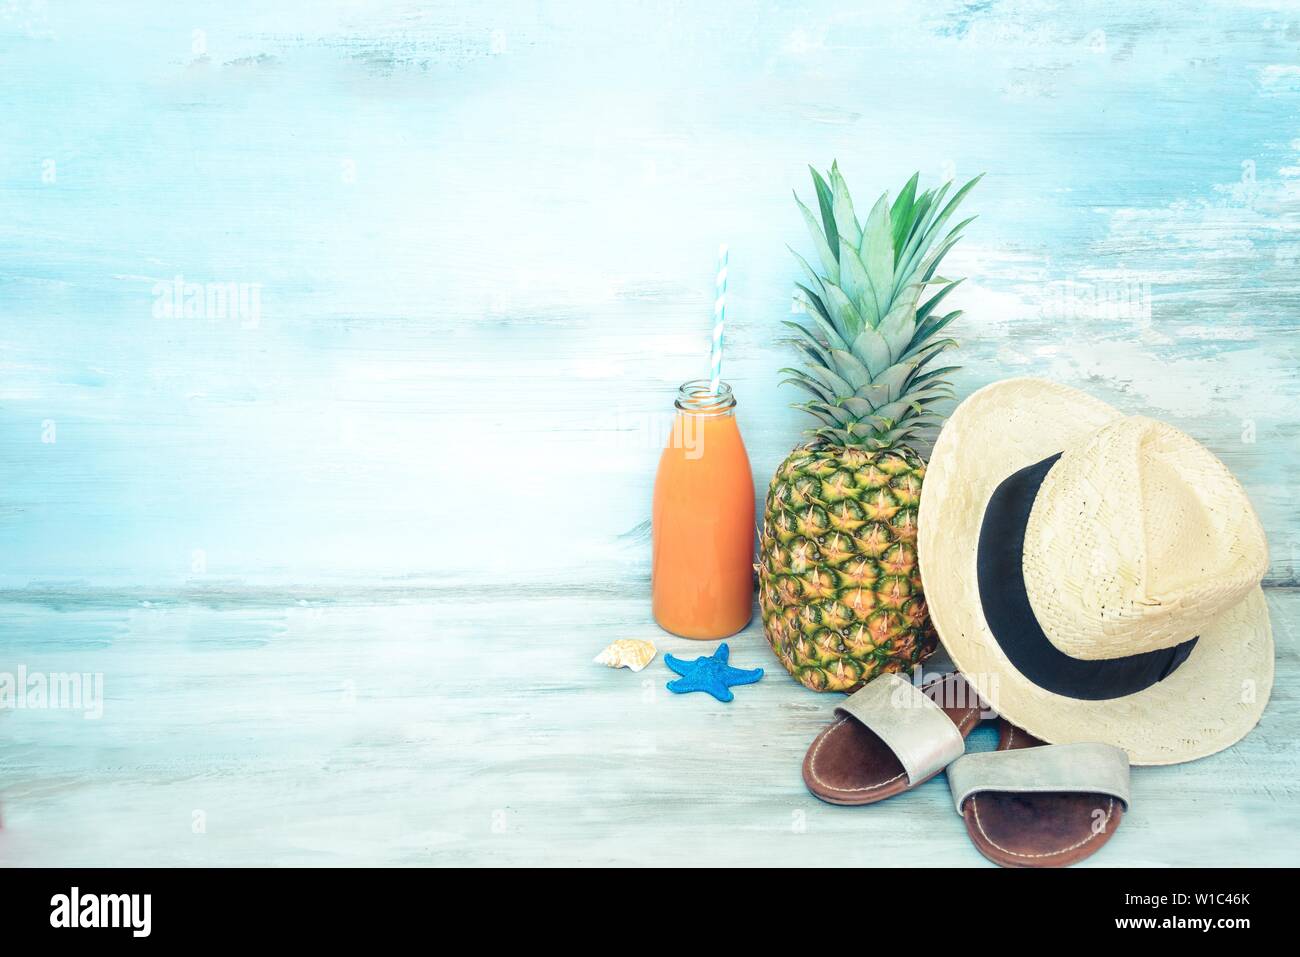 Summer concept stillife - ripe pineapple, straw hat, flip-flops and a bottle of multivitamin juice in front of a blue rustic wooden background. Stock Photo